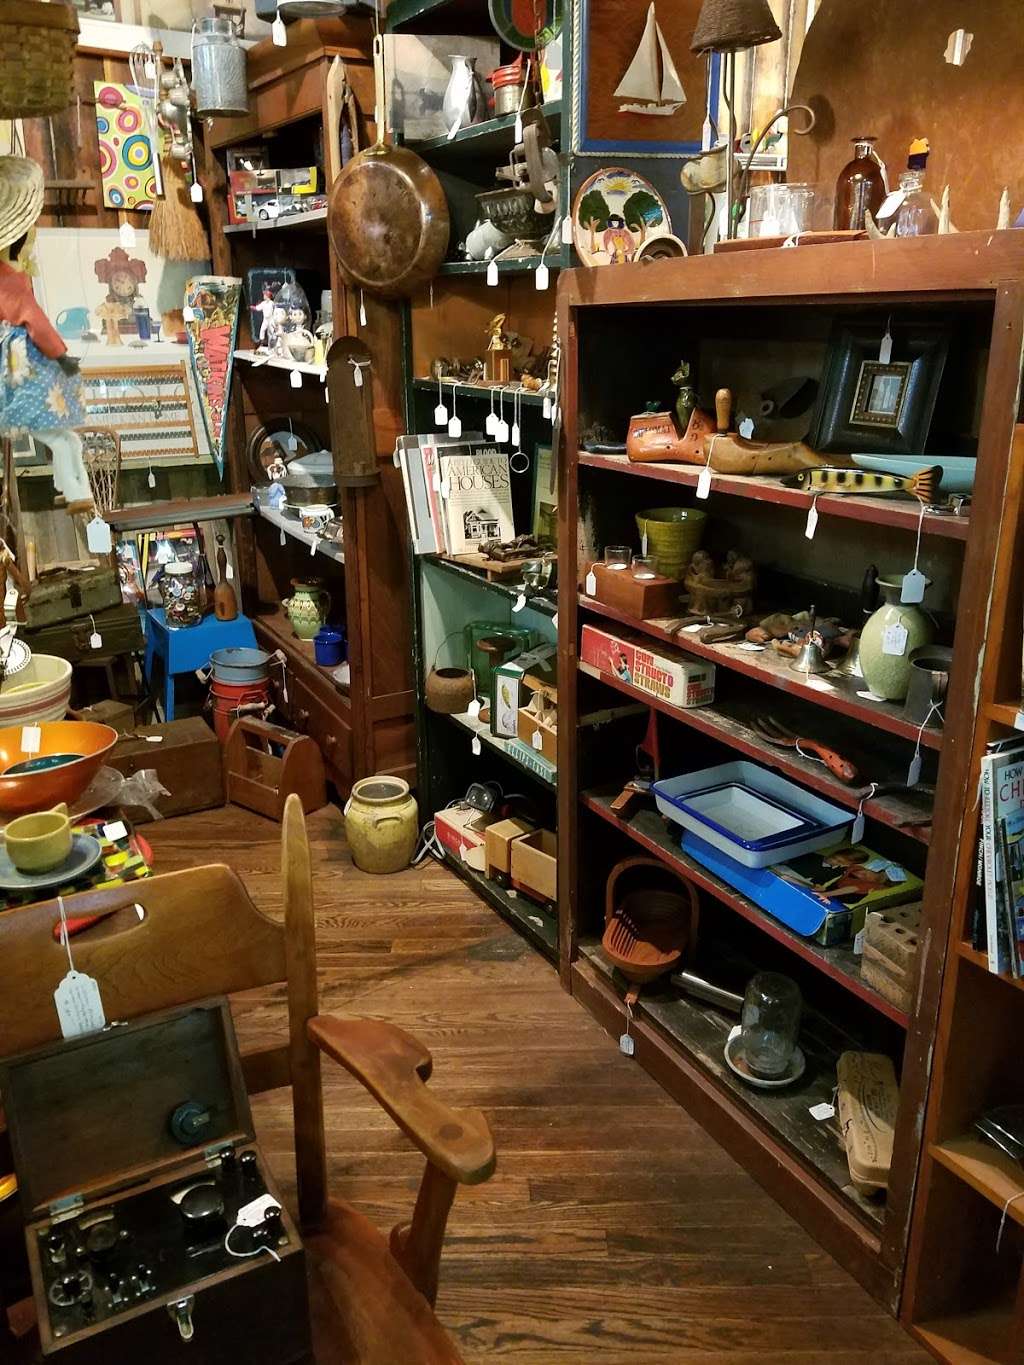 5 & 10 Antique Market | 3911, 115 S Main St, North East, MD 21901 | Phone: (410) 287-8318